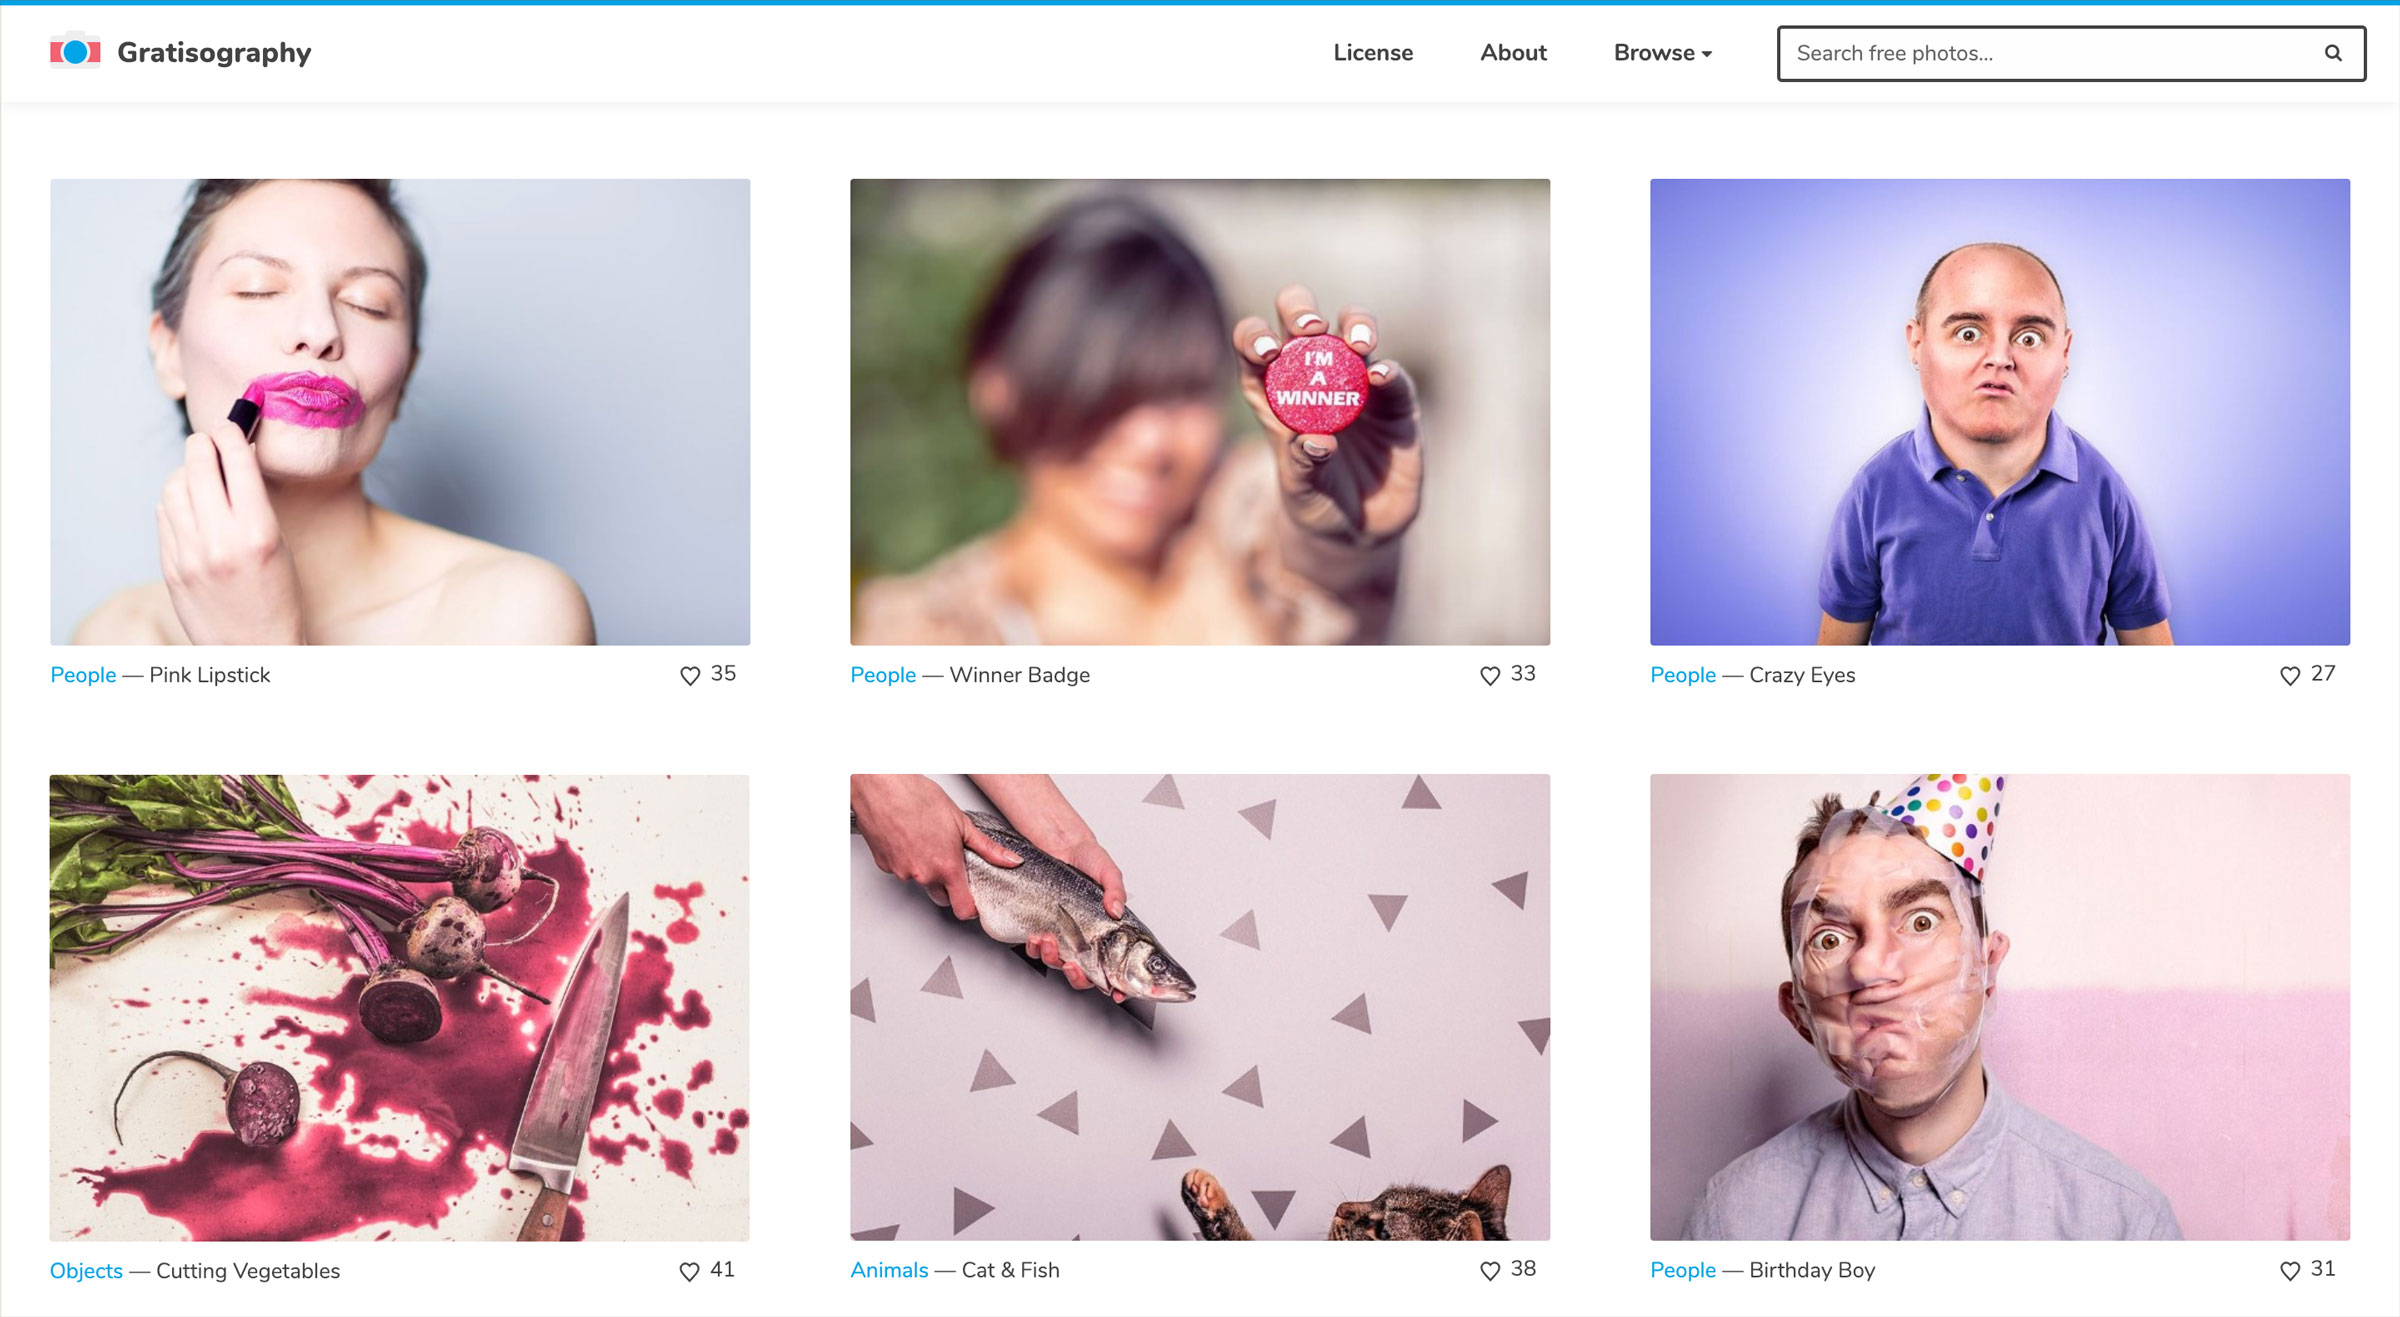 Gratisography: Web Project, Photography Resource, by Ryan McGuire